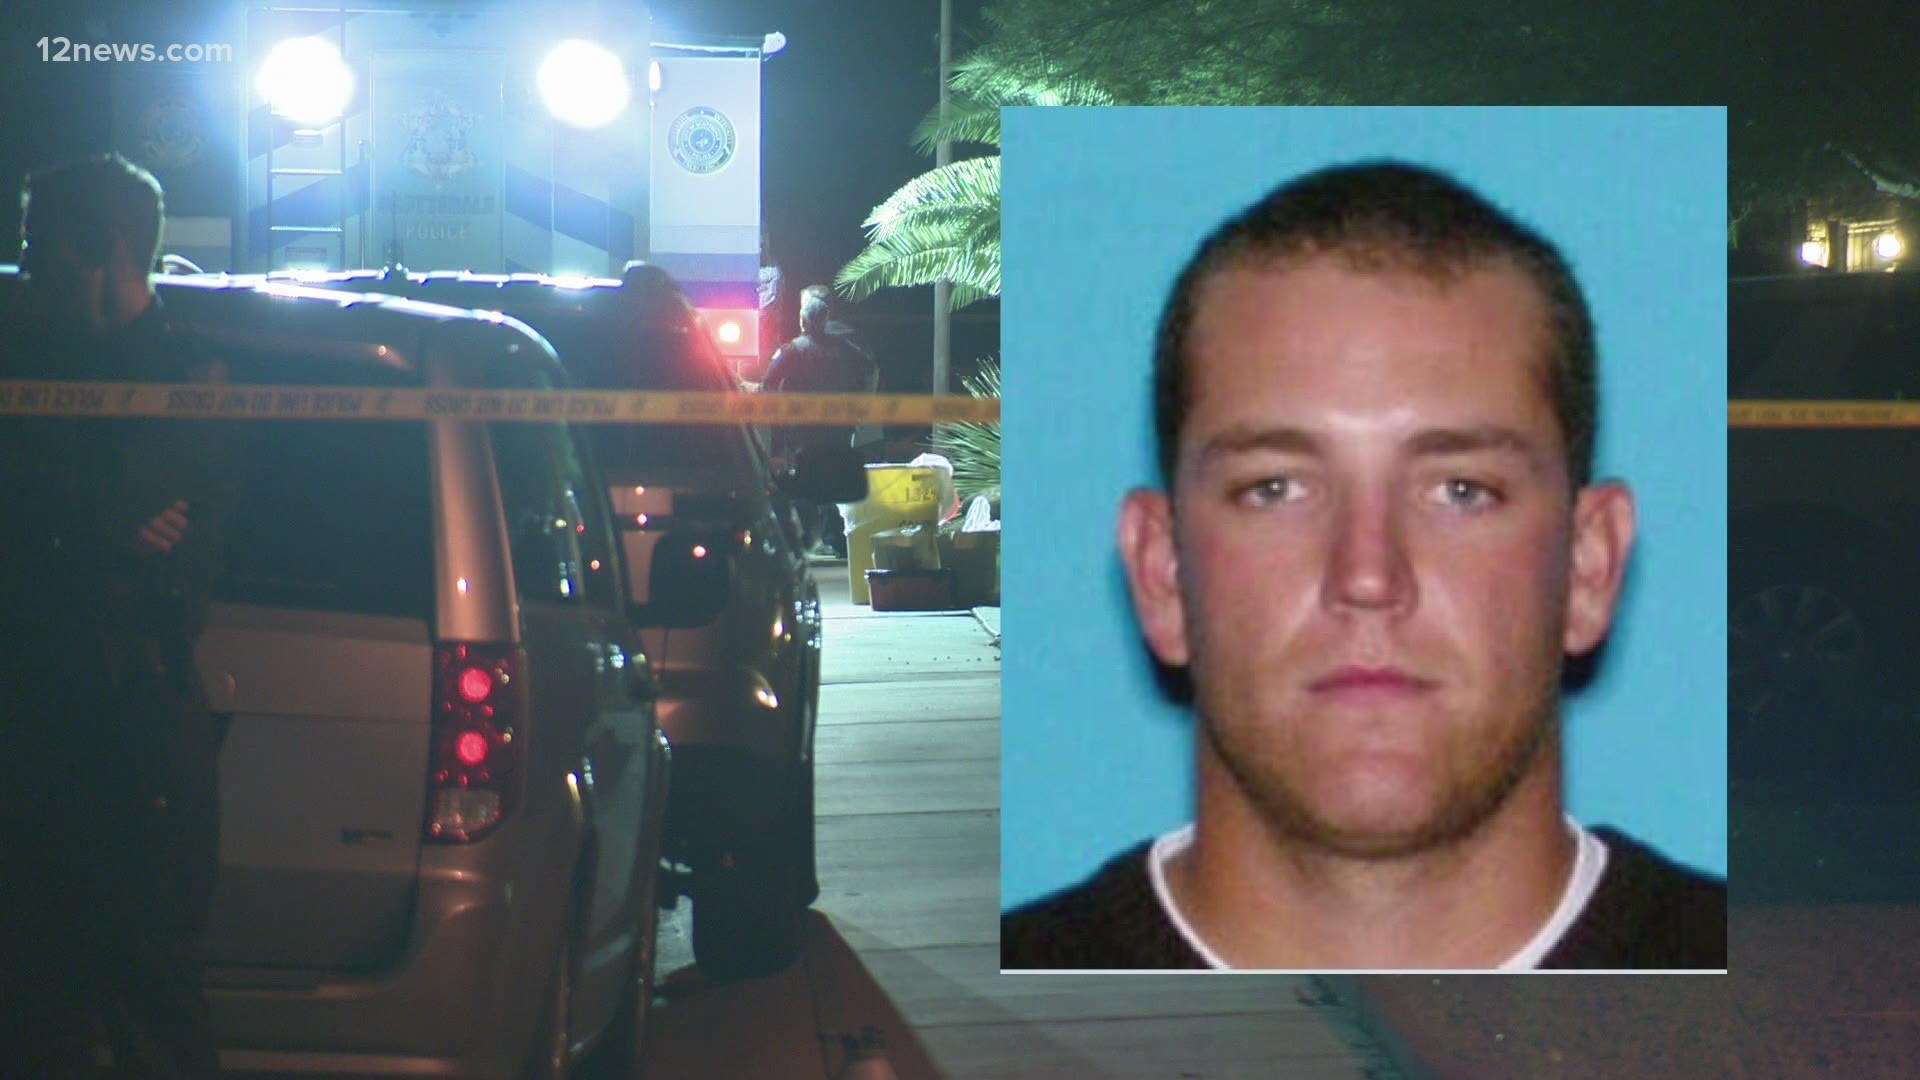 A woman was killed in her home last night by her ex-boyfriend. Police are looking for former MLB pitcher Charles Haeger.